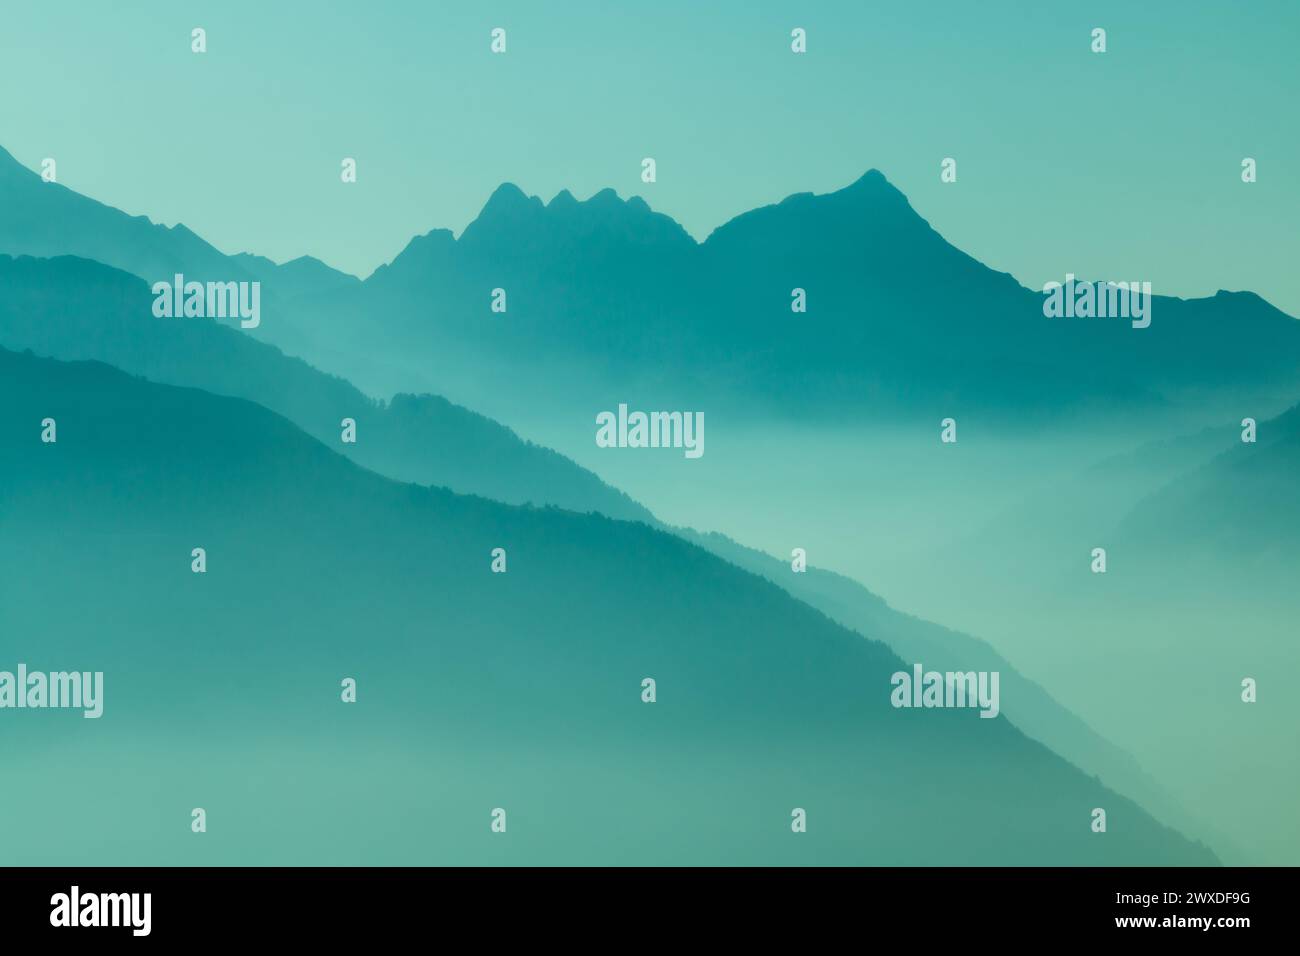 Spectacular mountain ranges silhouettes in shades of blue. Stock Photo